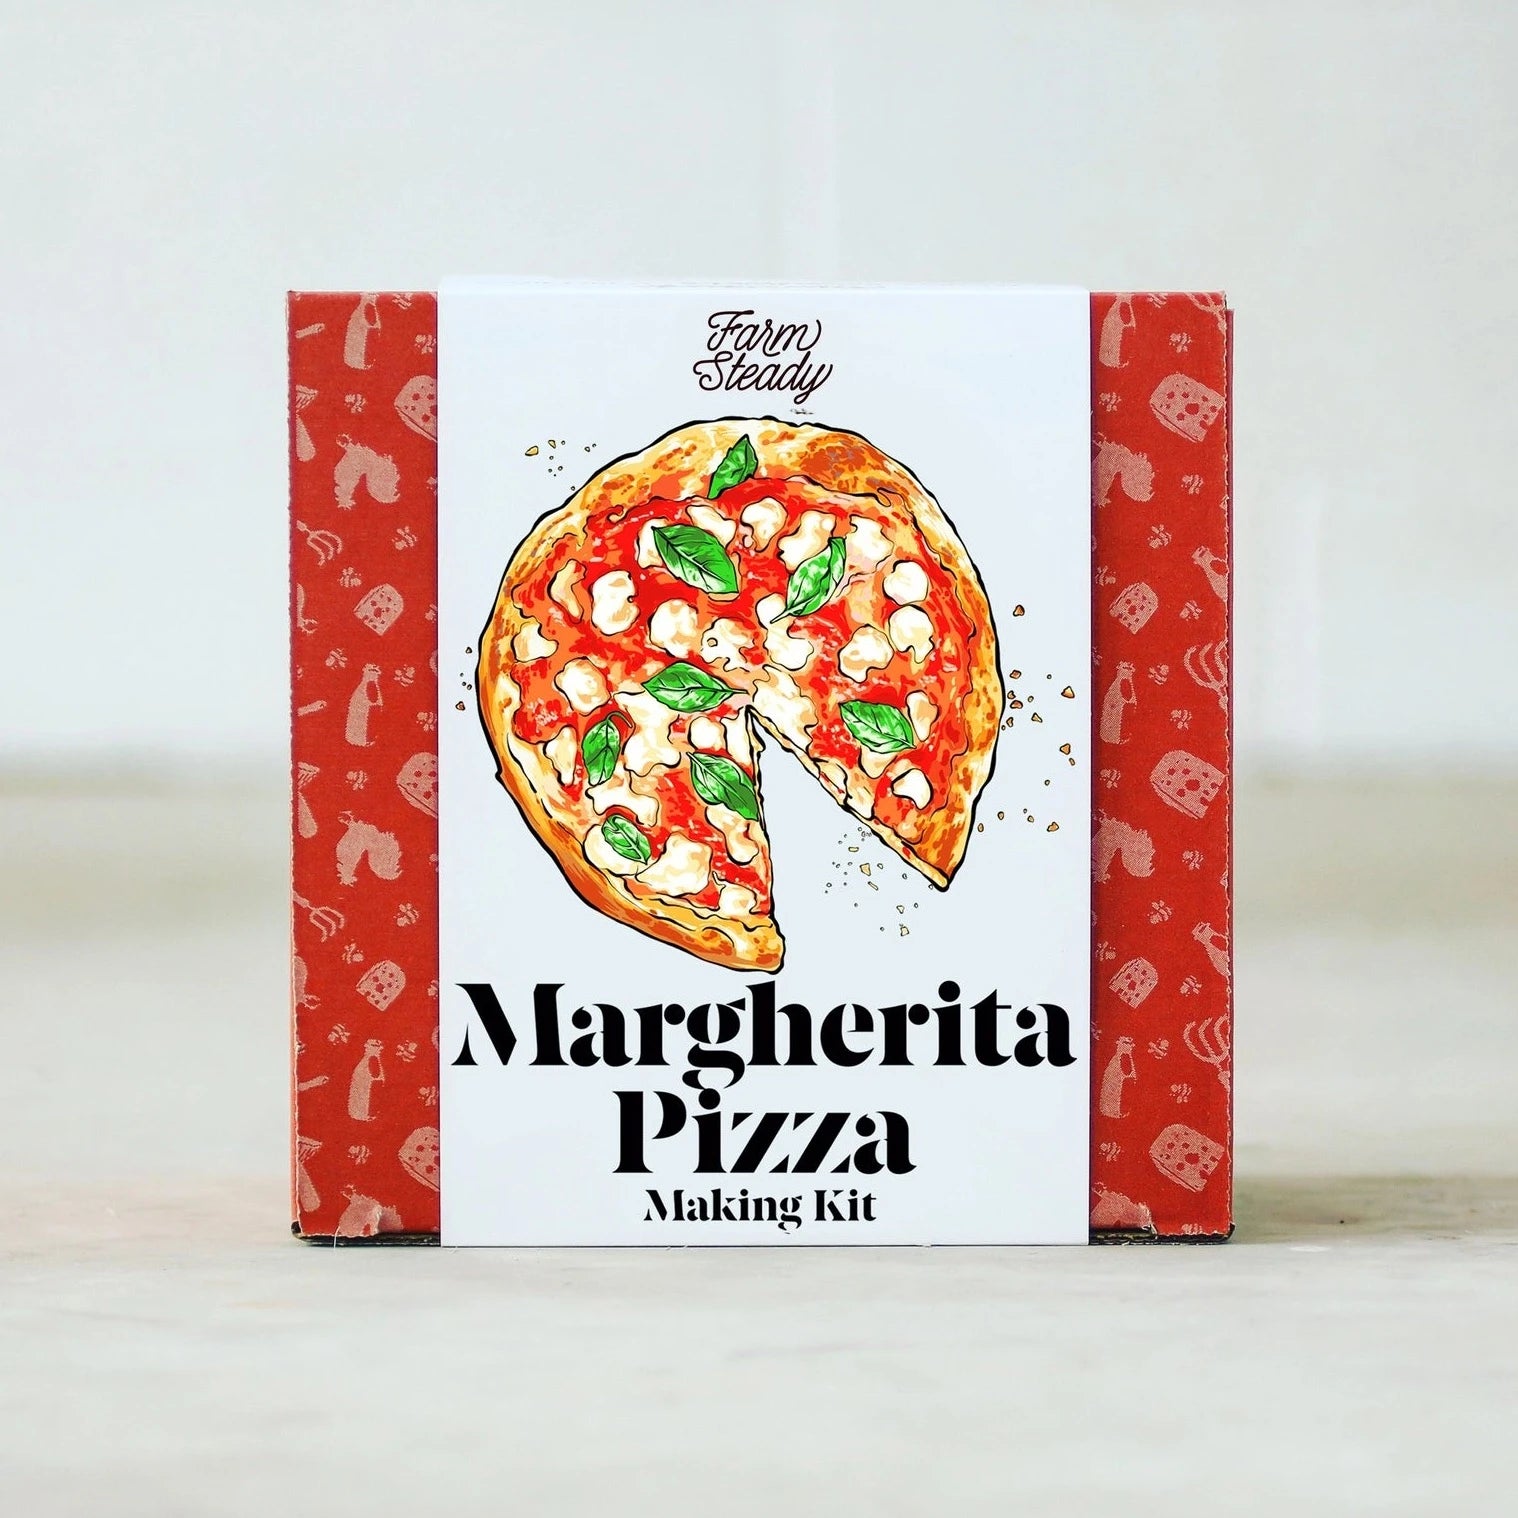 red square box with food illustrations printed on it. box has white label with pizza illustrated in the center and black text below it